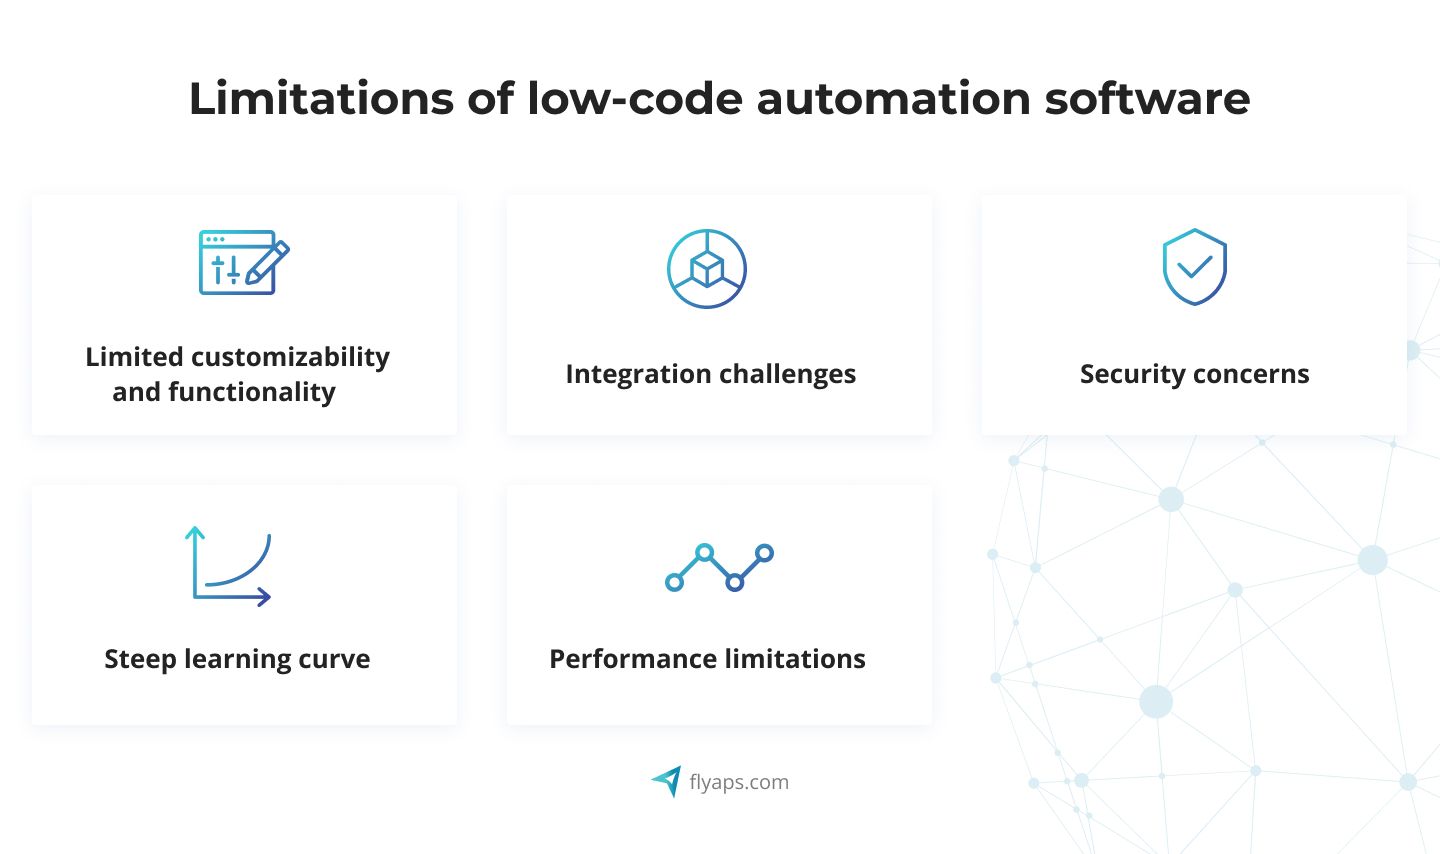 Limitations of low-code automation software